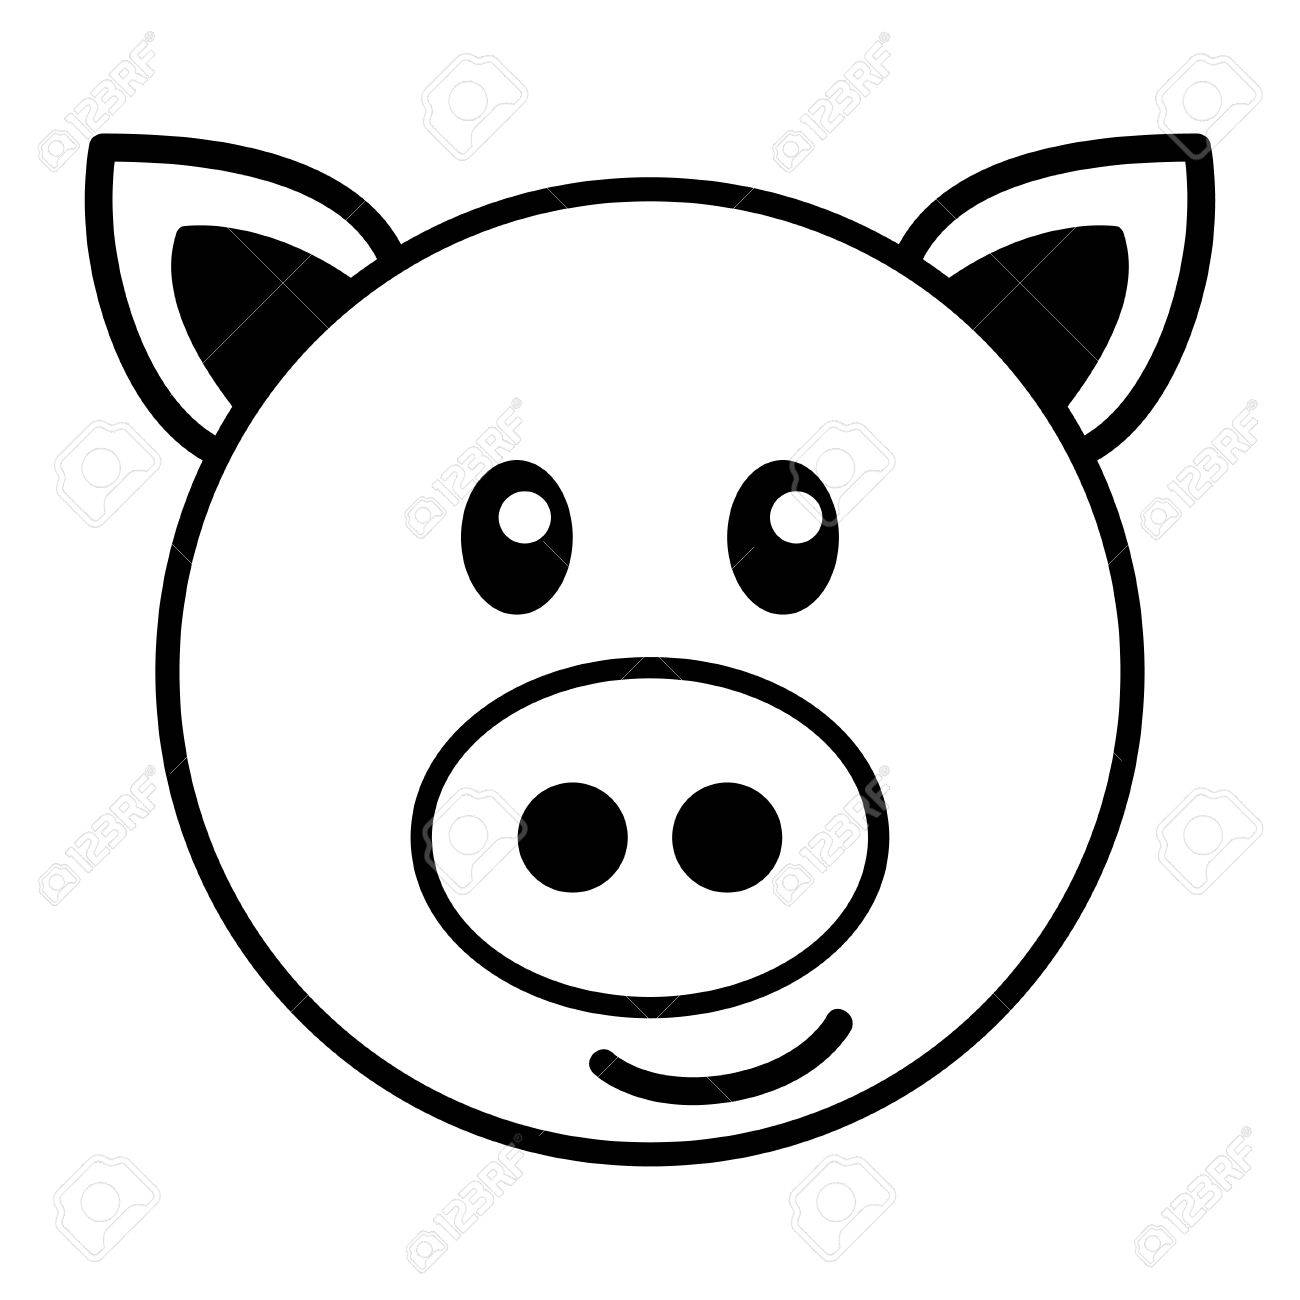 Pig Drawing Images At Getdrawings  Free For Personal Use Pig dedans Dessin Tete De Cochon 